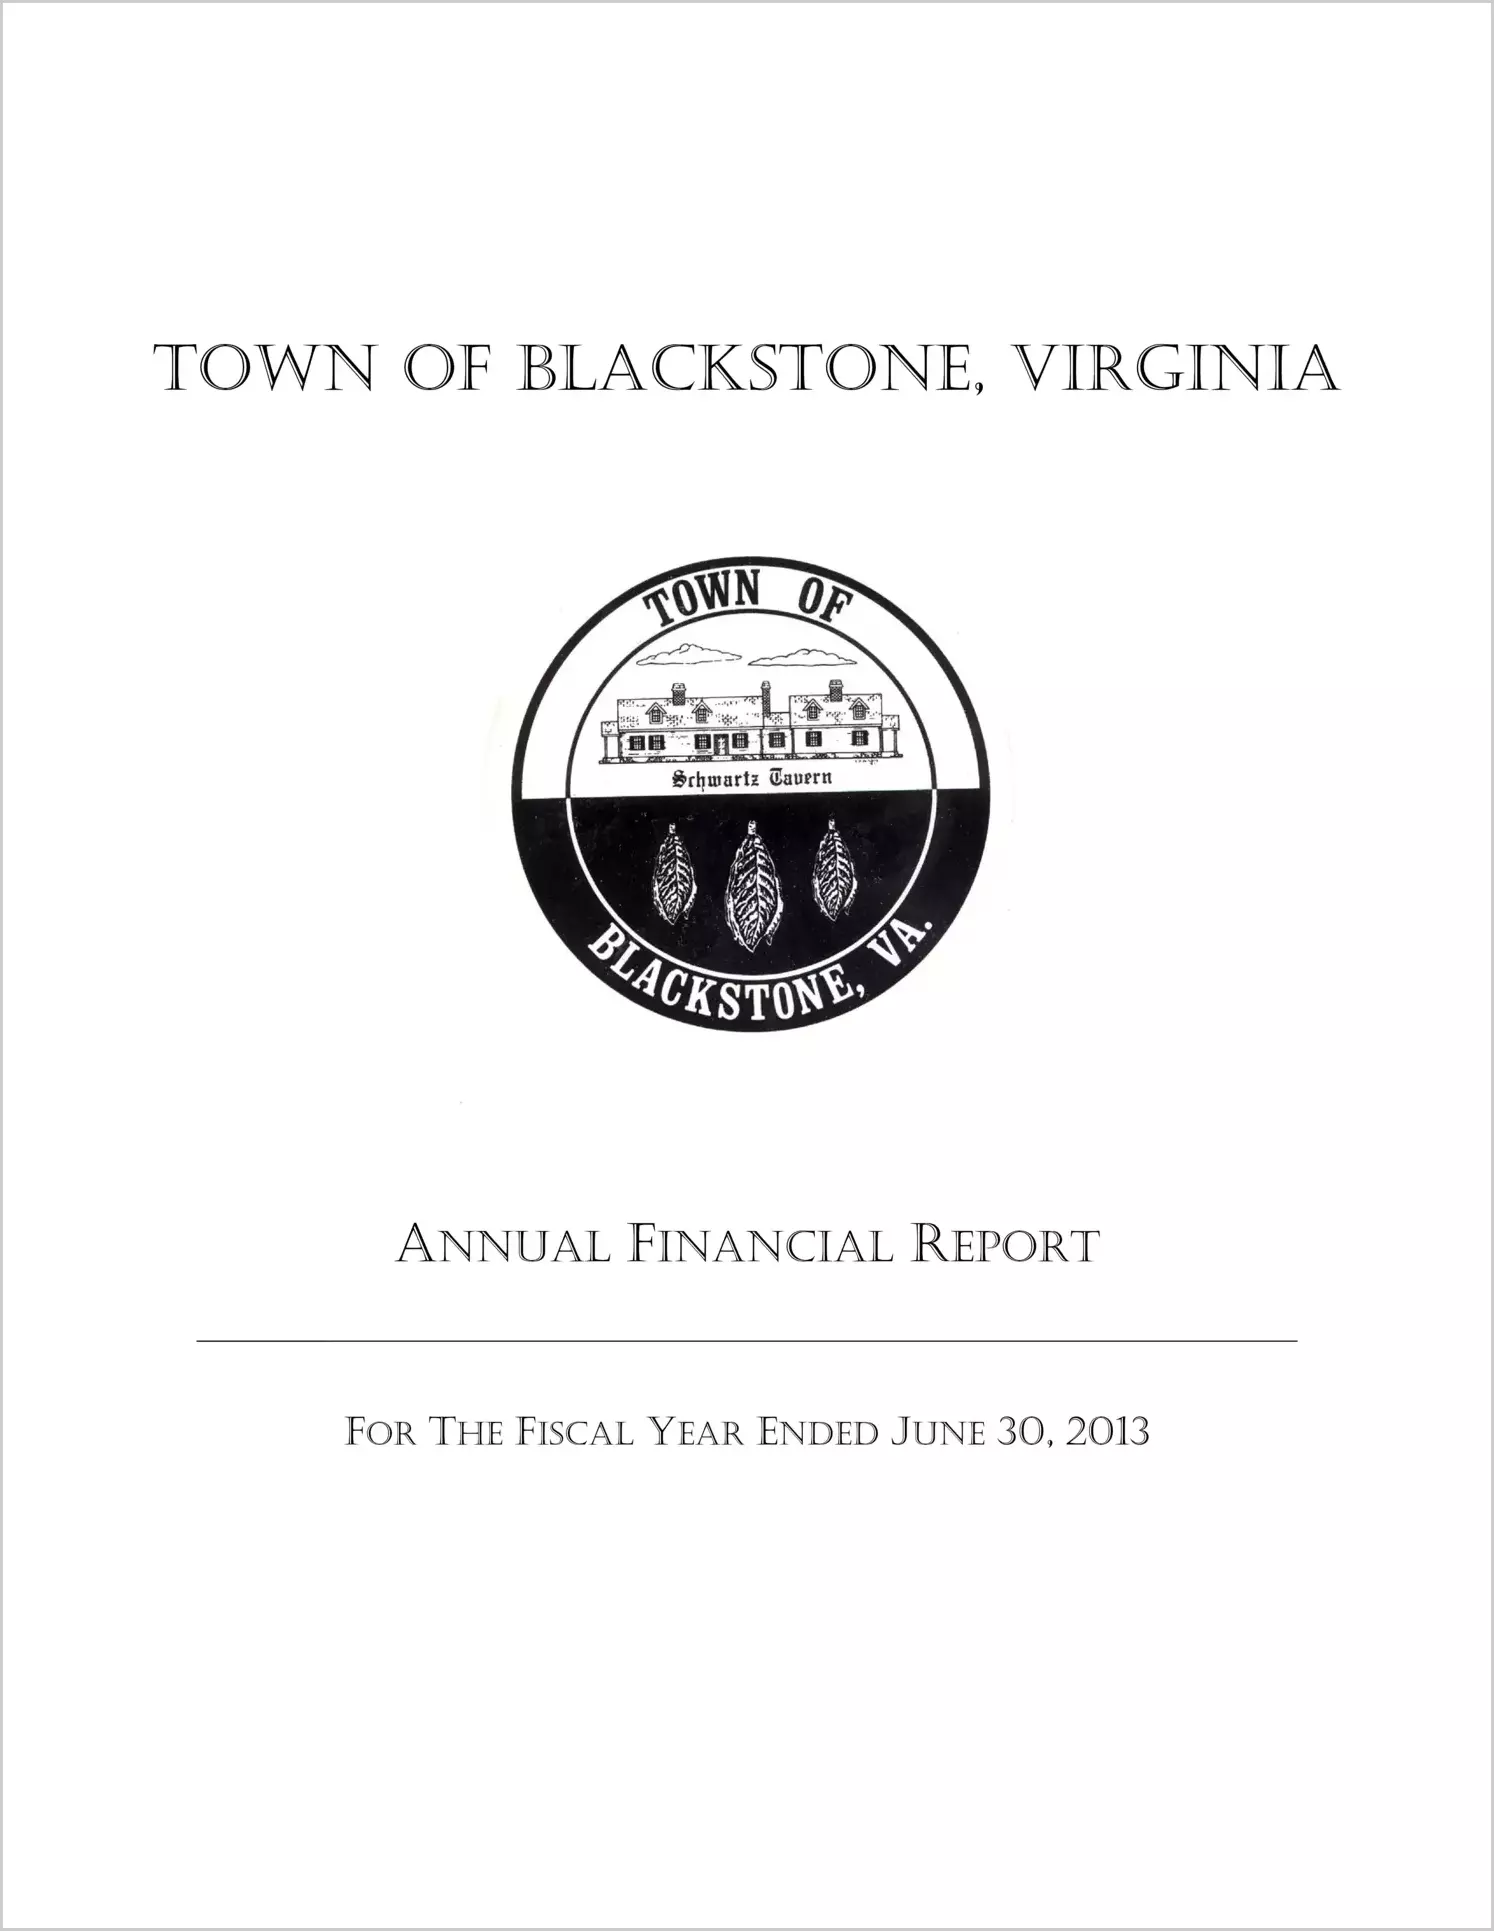 2013 Annual Financial Report for Town of Blackstone